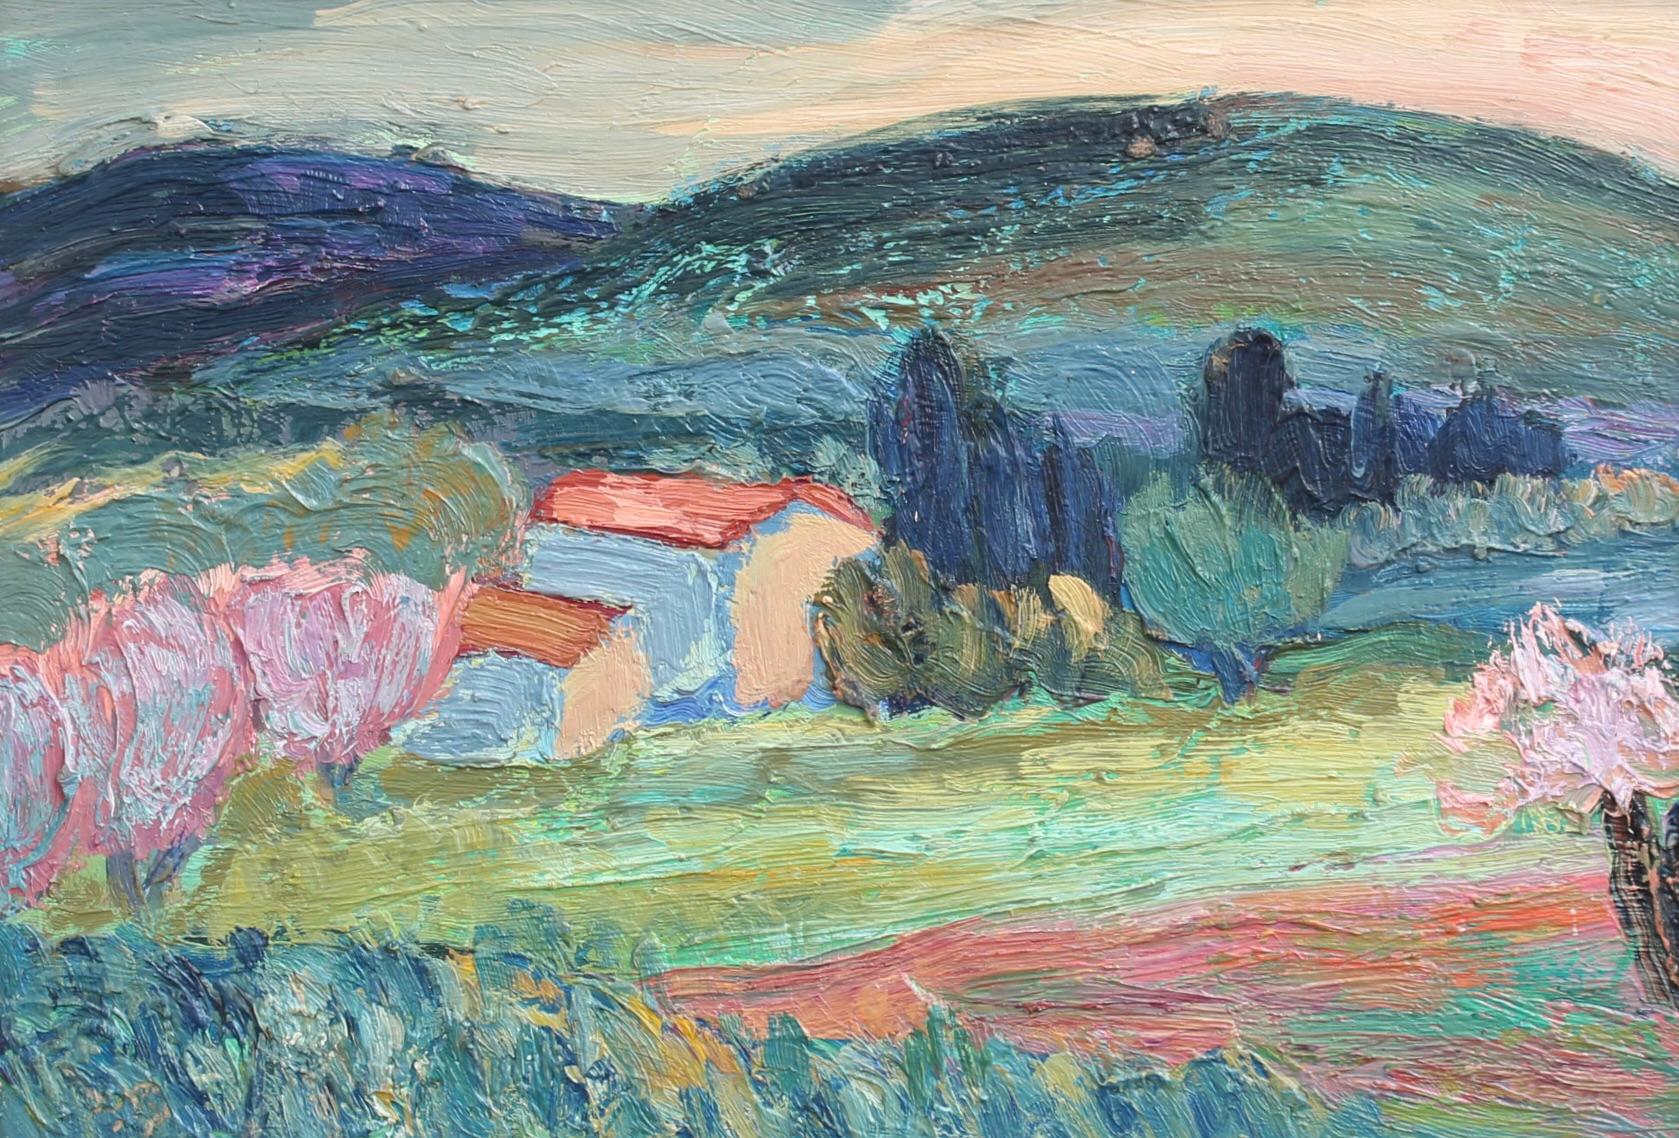 'Provençal Hillside', oil on board, by Anna Costa (circa 1960s). This is a lovely landscape painted by the artist in vibrant colours in an Impressionist style using a thick impasto technique. A pair of small farm buildings sit amongst the verdure